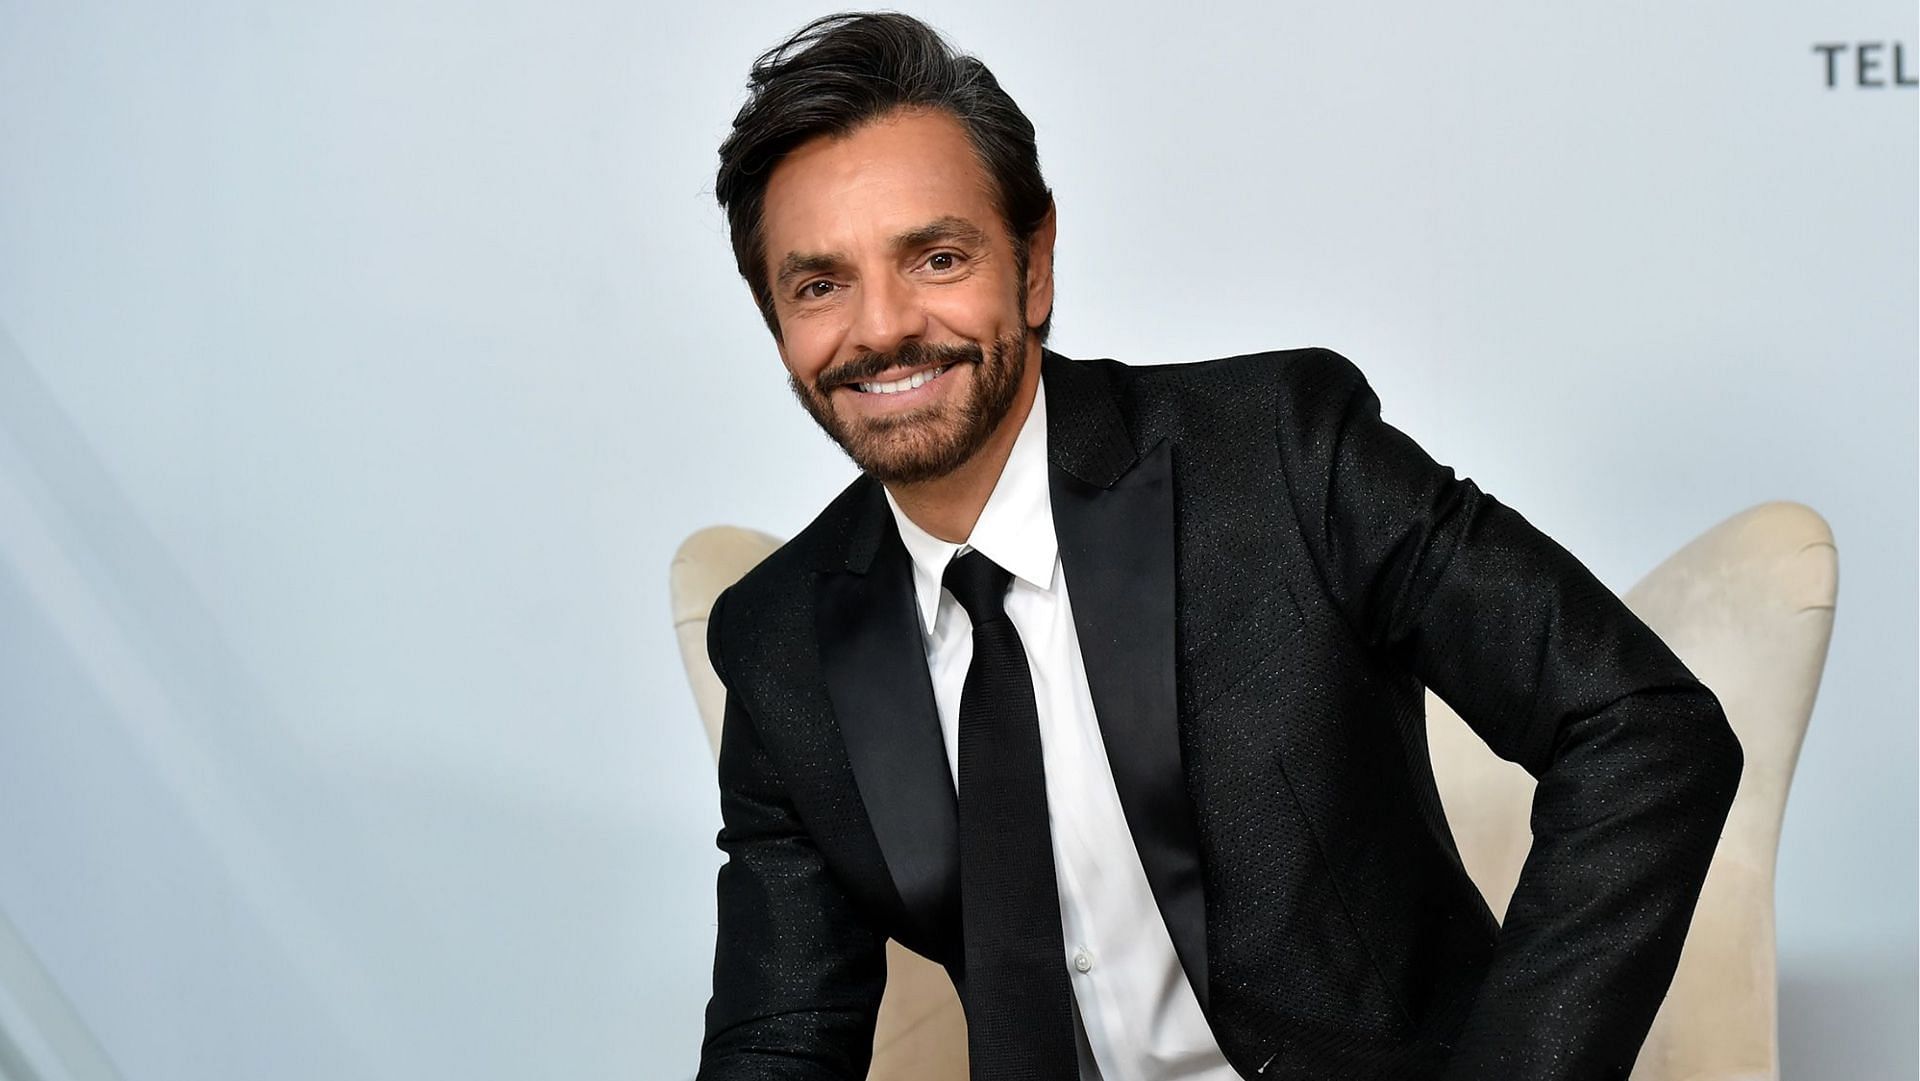 Eugenio Derbez had an accident a couple of days ago. (Image via David Becker/Getty Images)